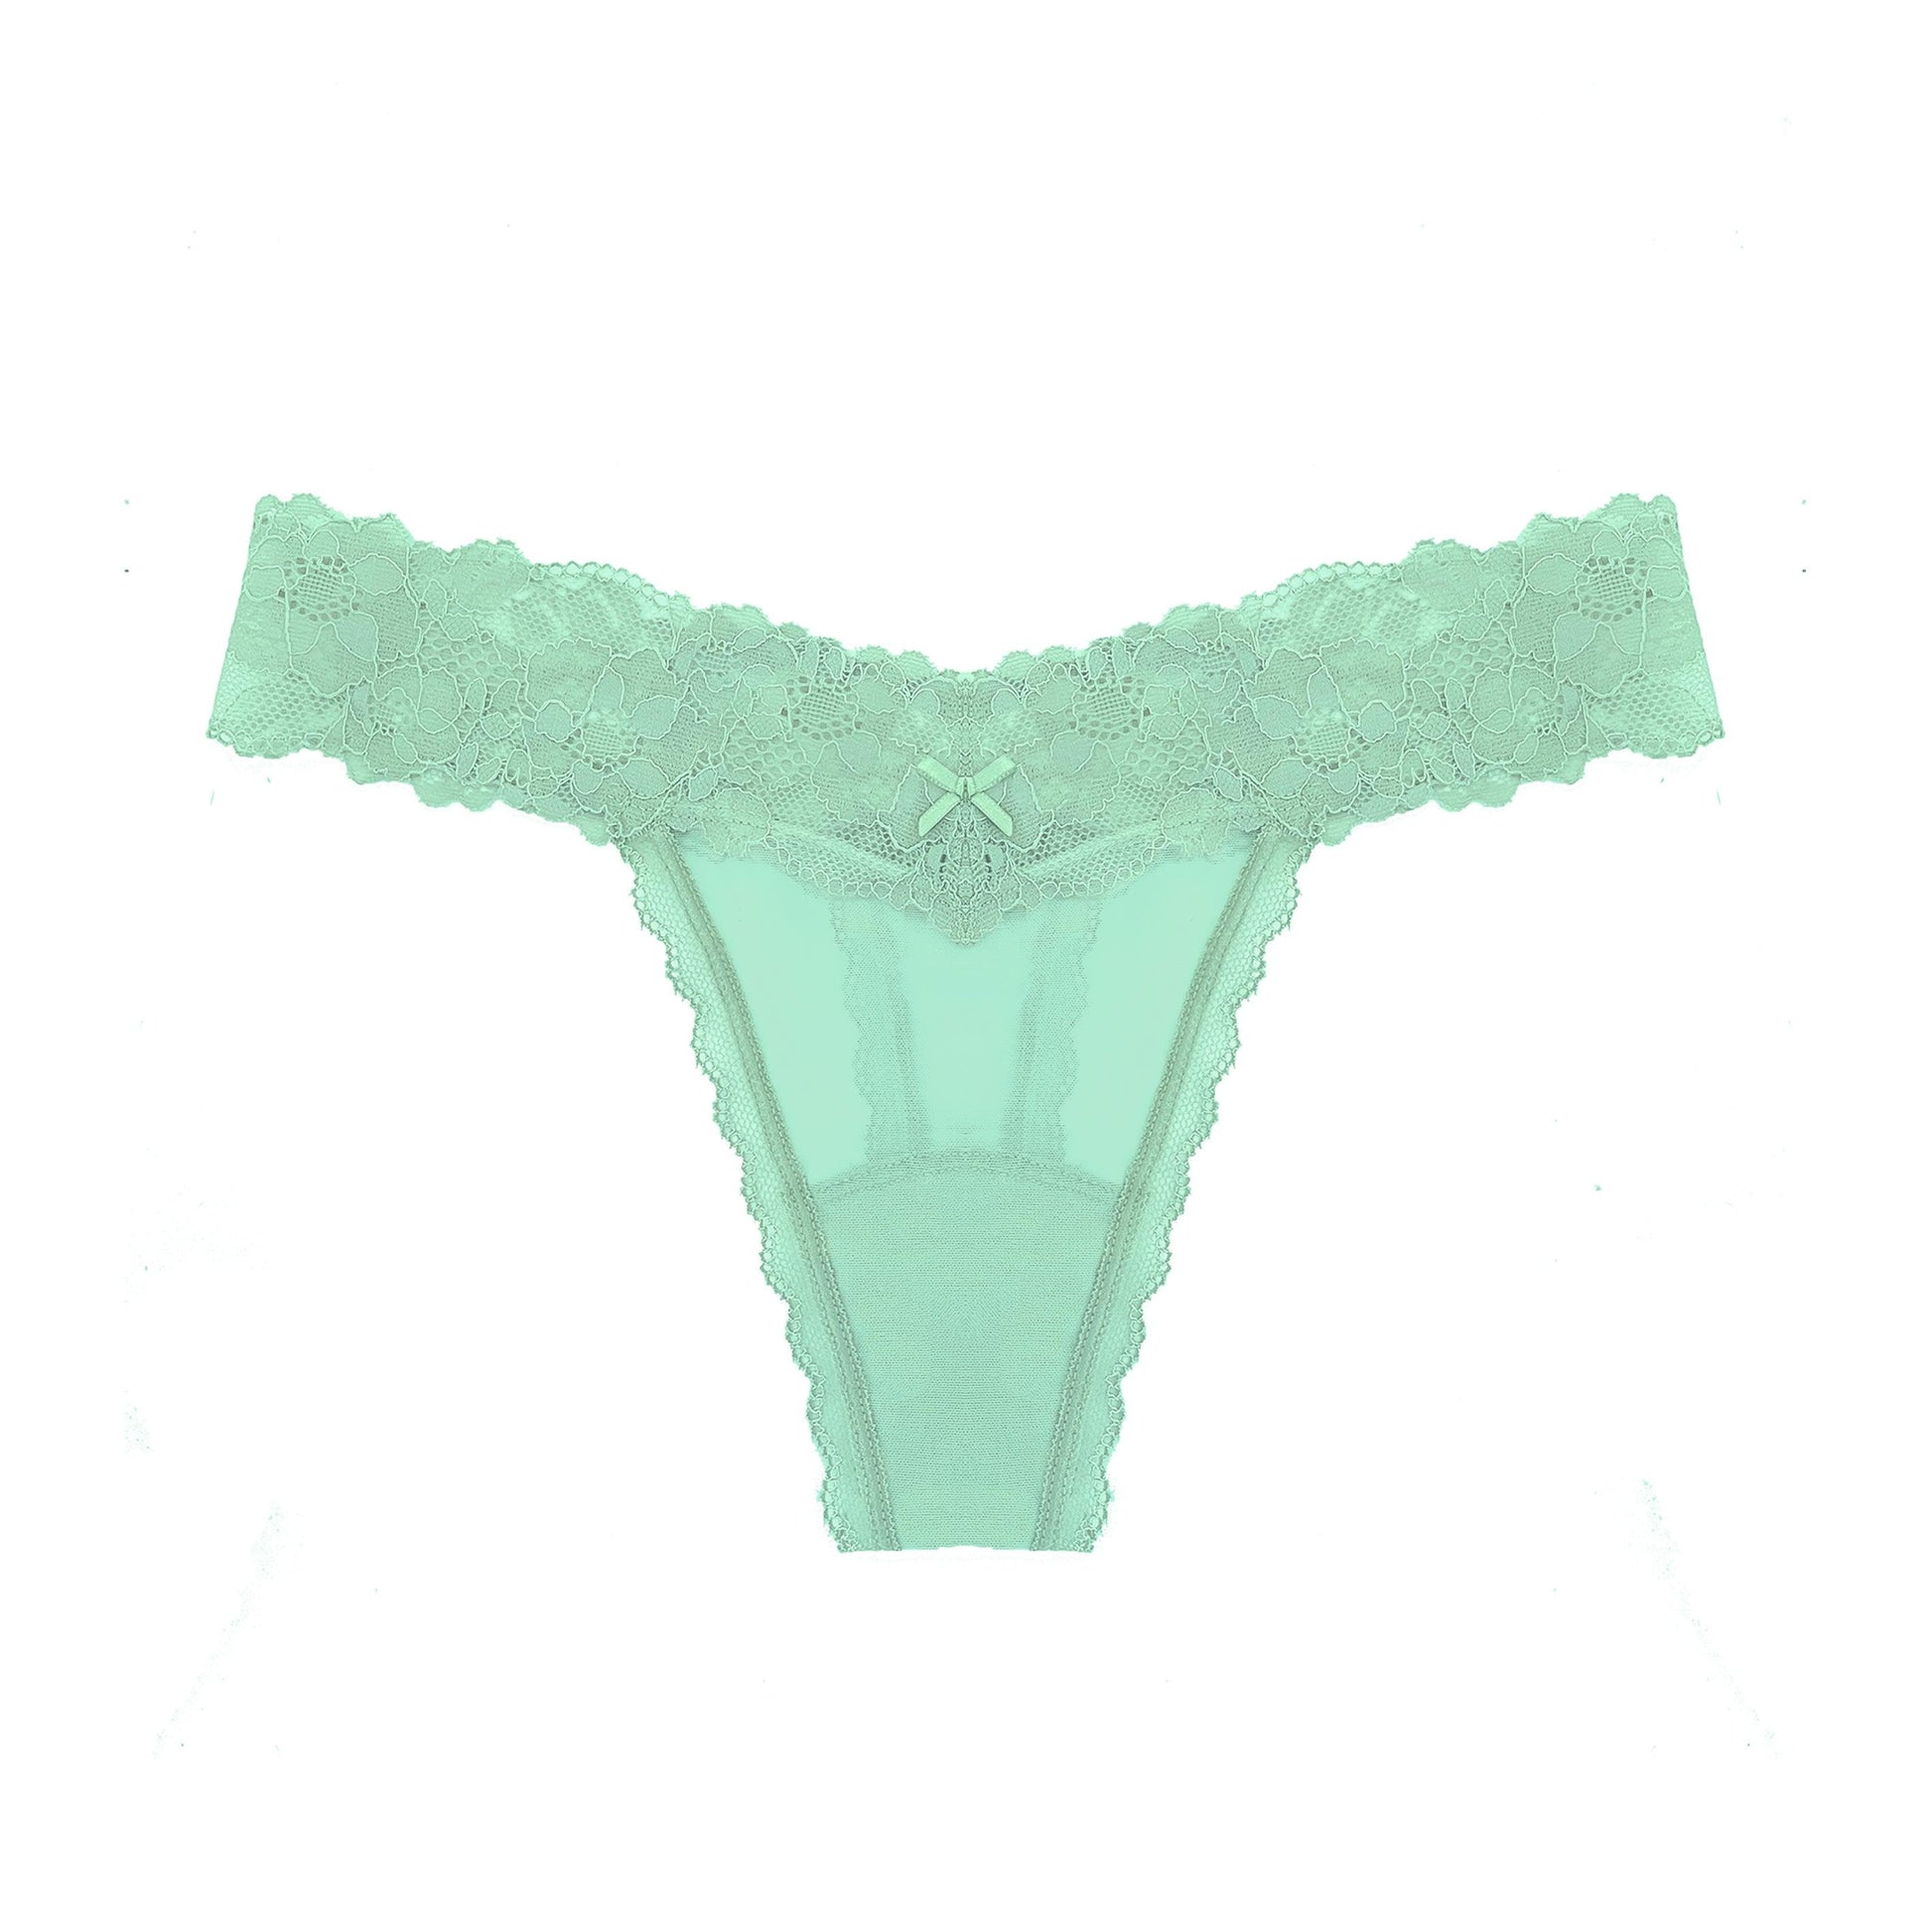 Barely There Thong in Mint Pistachio - Takkleberry